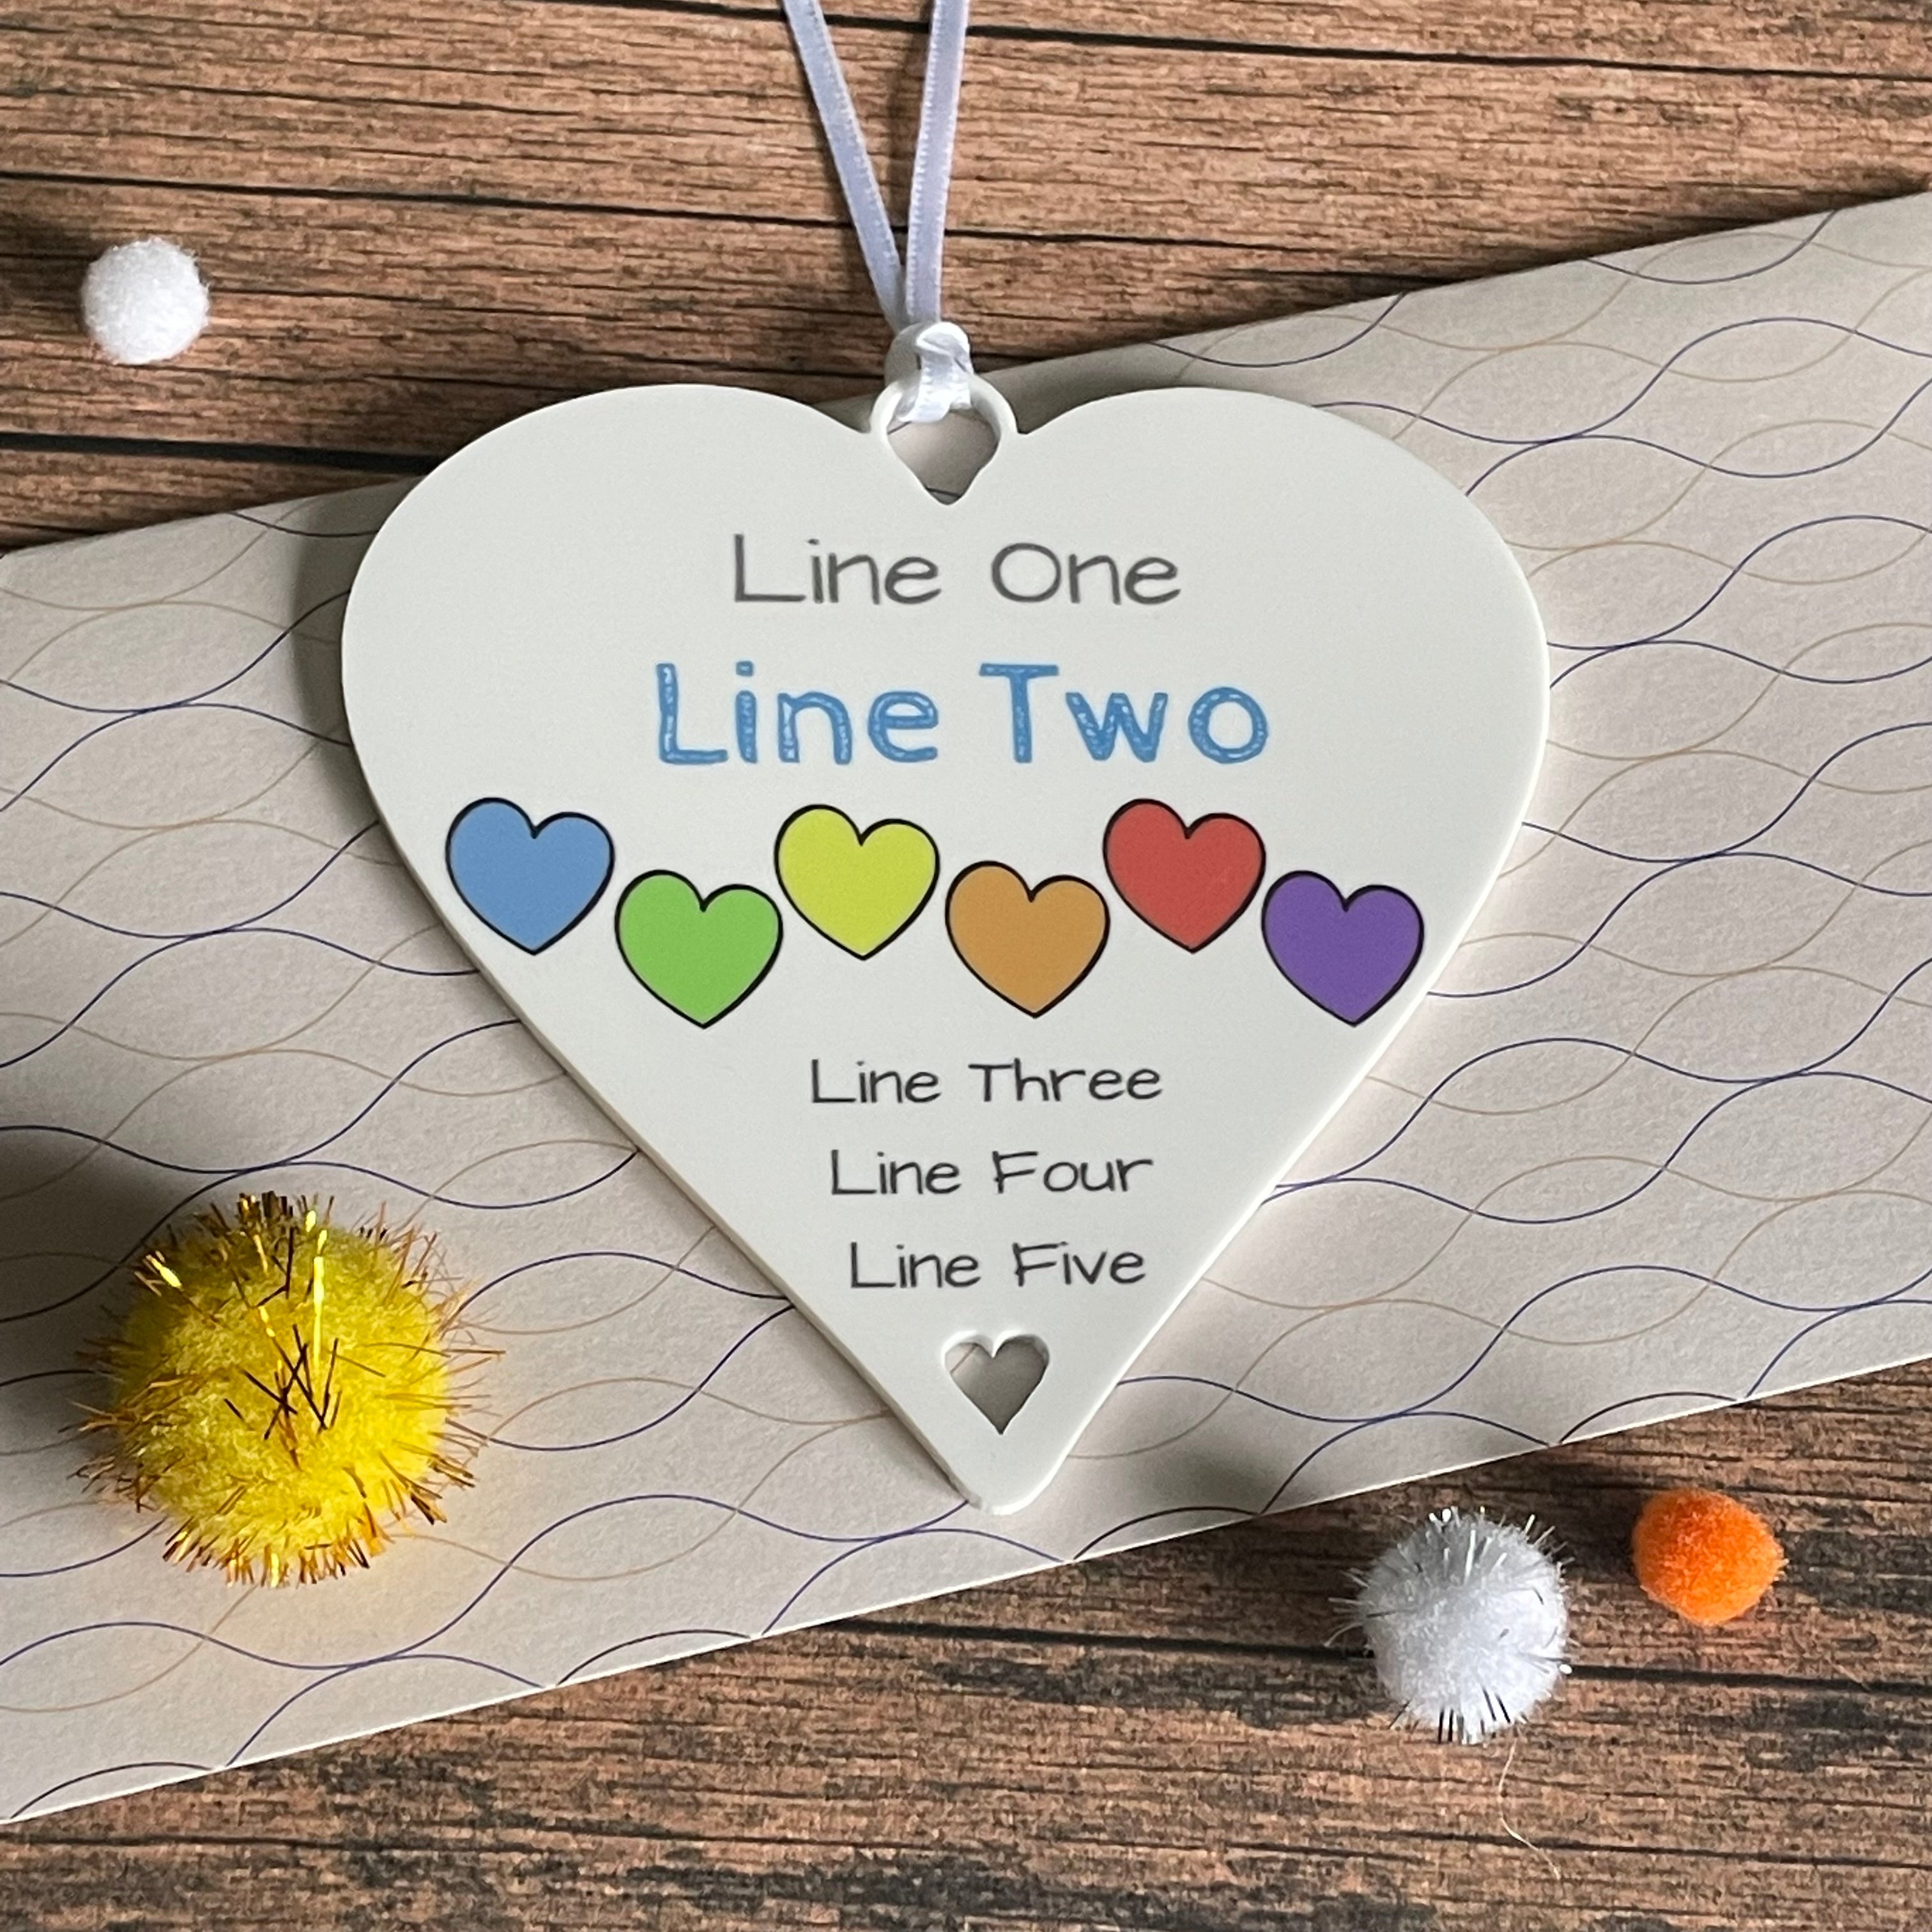 Personalised Fathers Day Gifts Rainbow Hearts - 10cm Heart